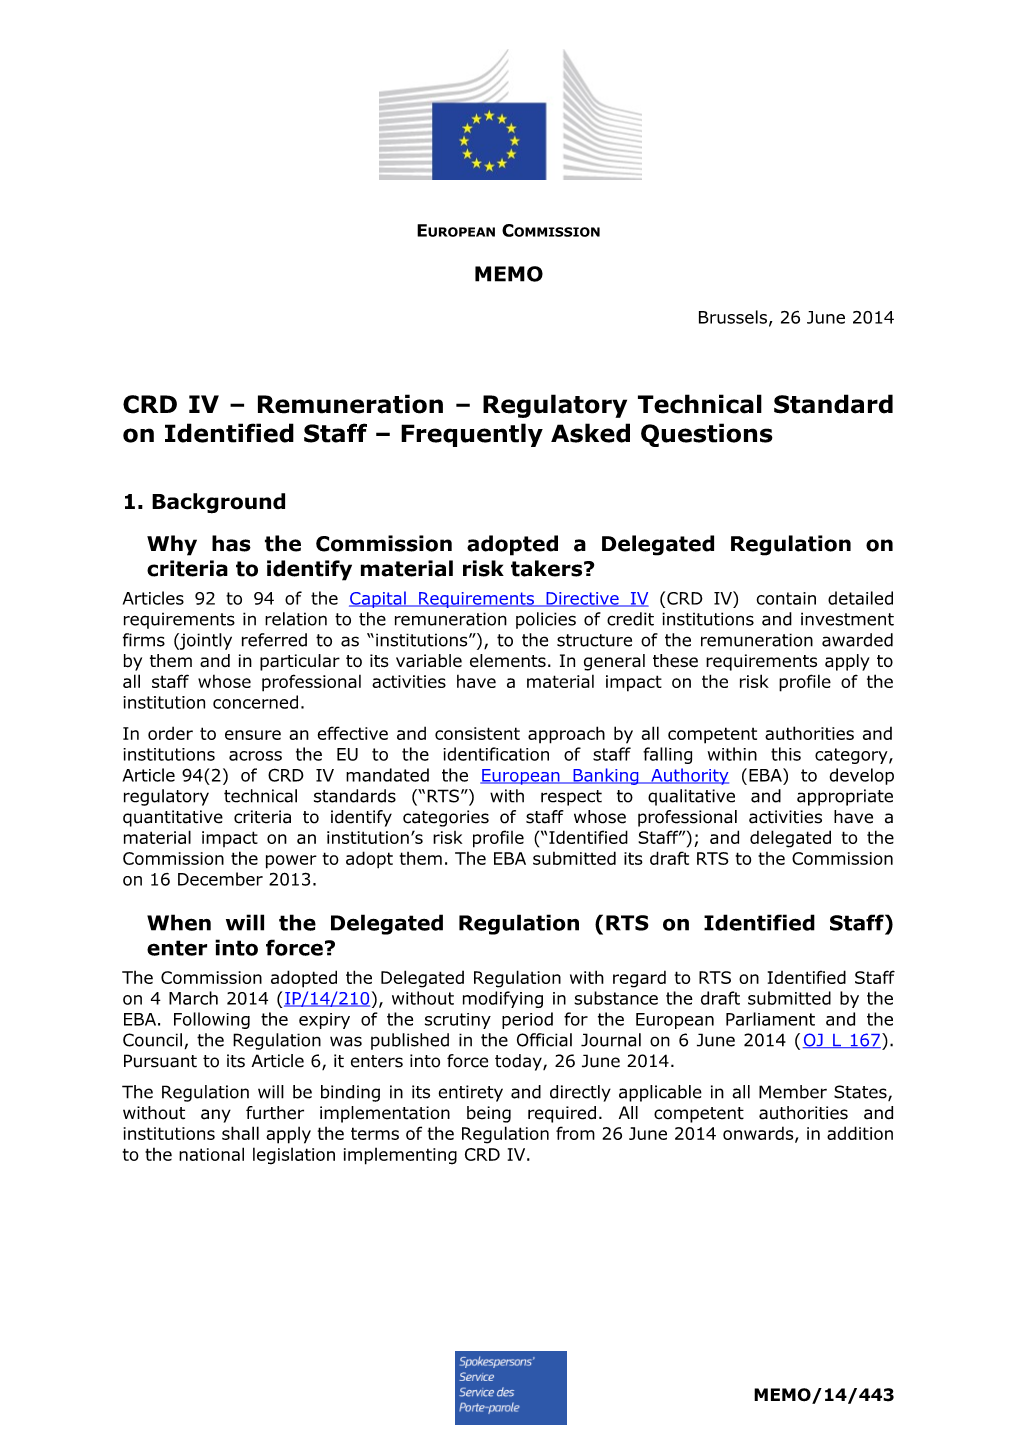 CRD IV Remuneration Regulatory Technical Standard on Identified Staff Frequently Asked